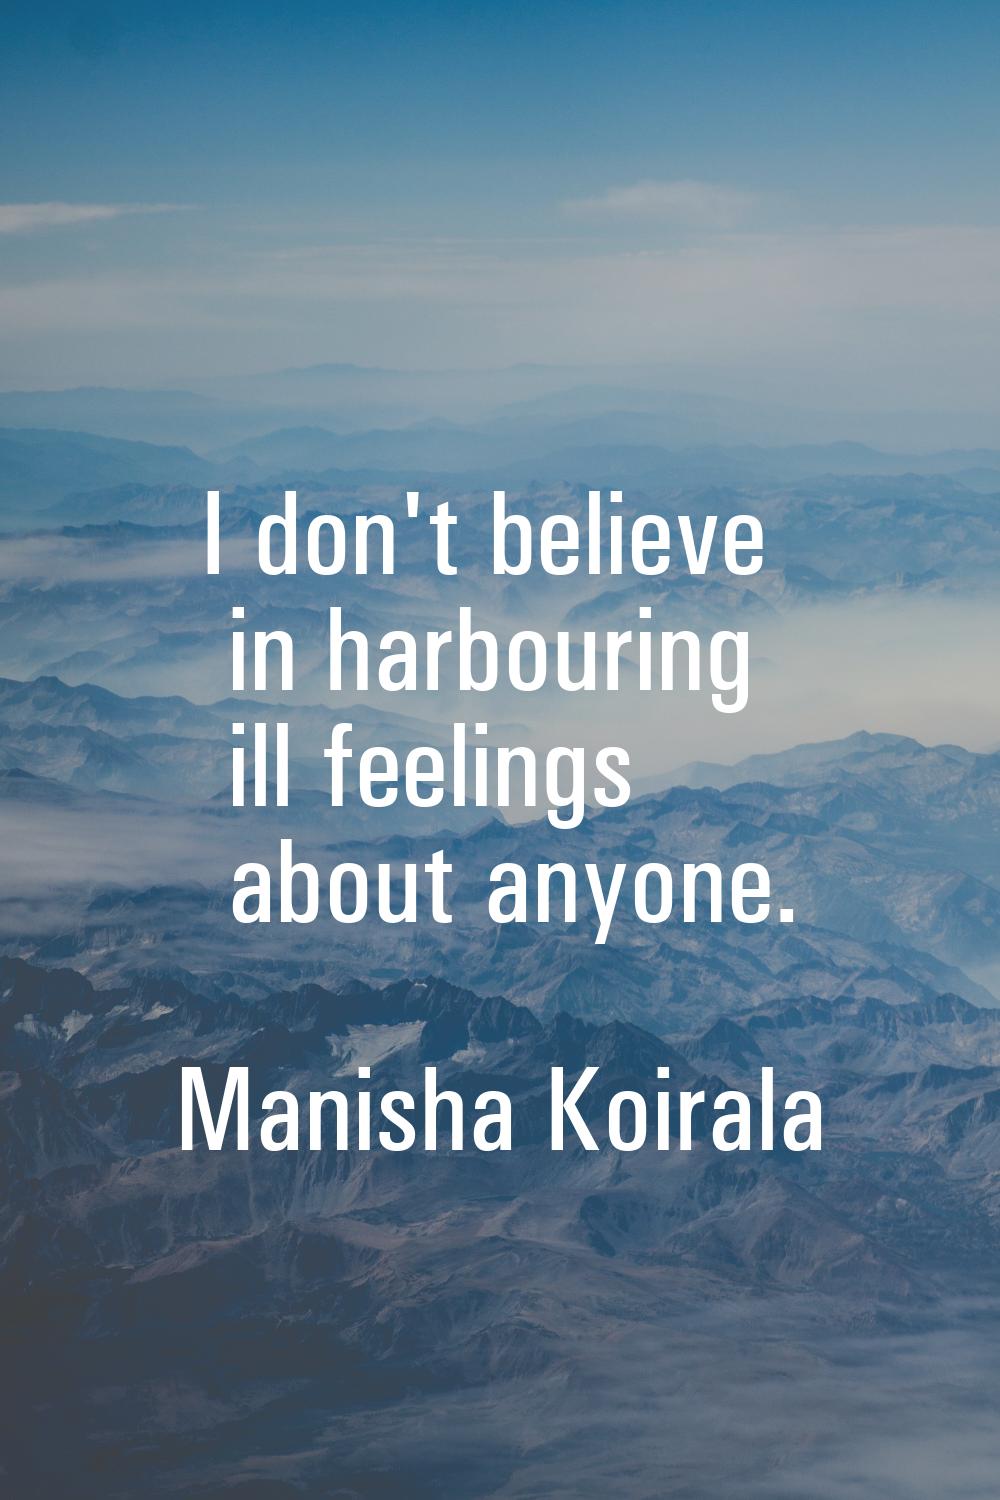 I don't believe in harbouring ill feelings about anyone.